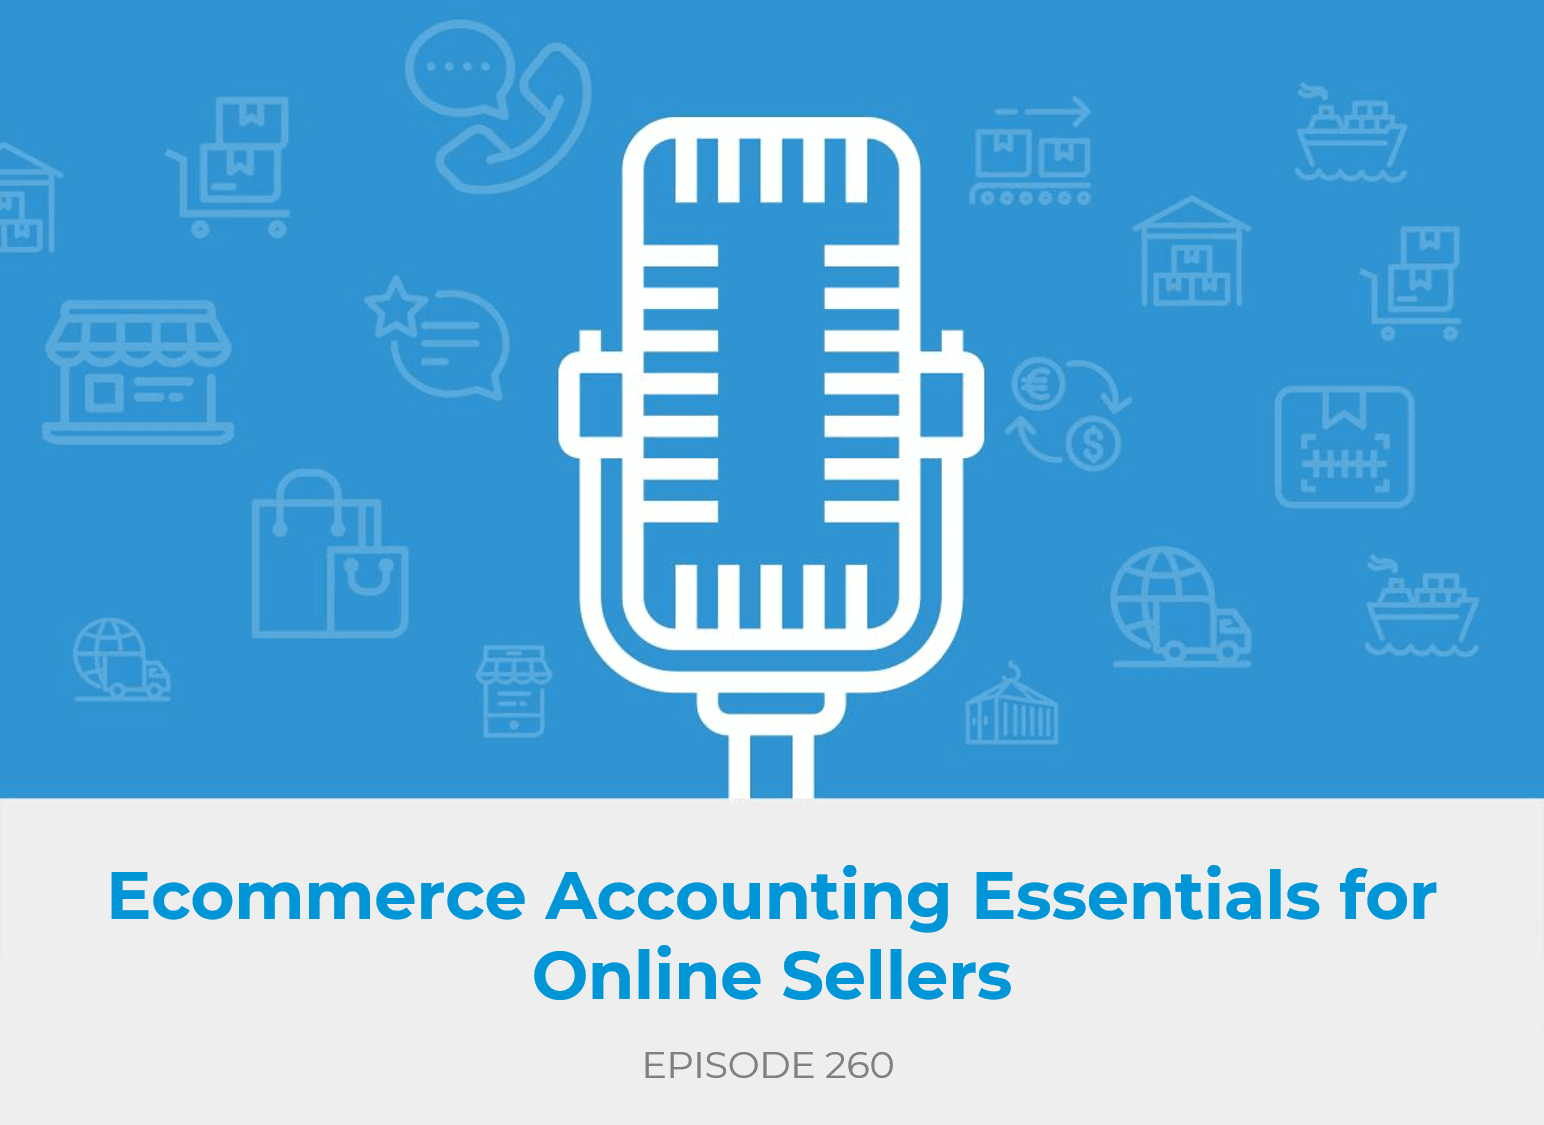 Ecommerce Accounting Essentials for Online Sellers